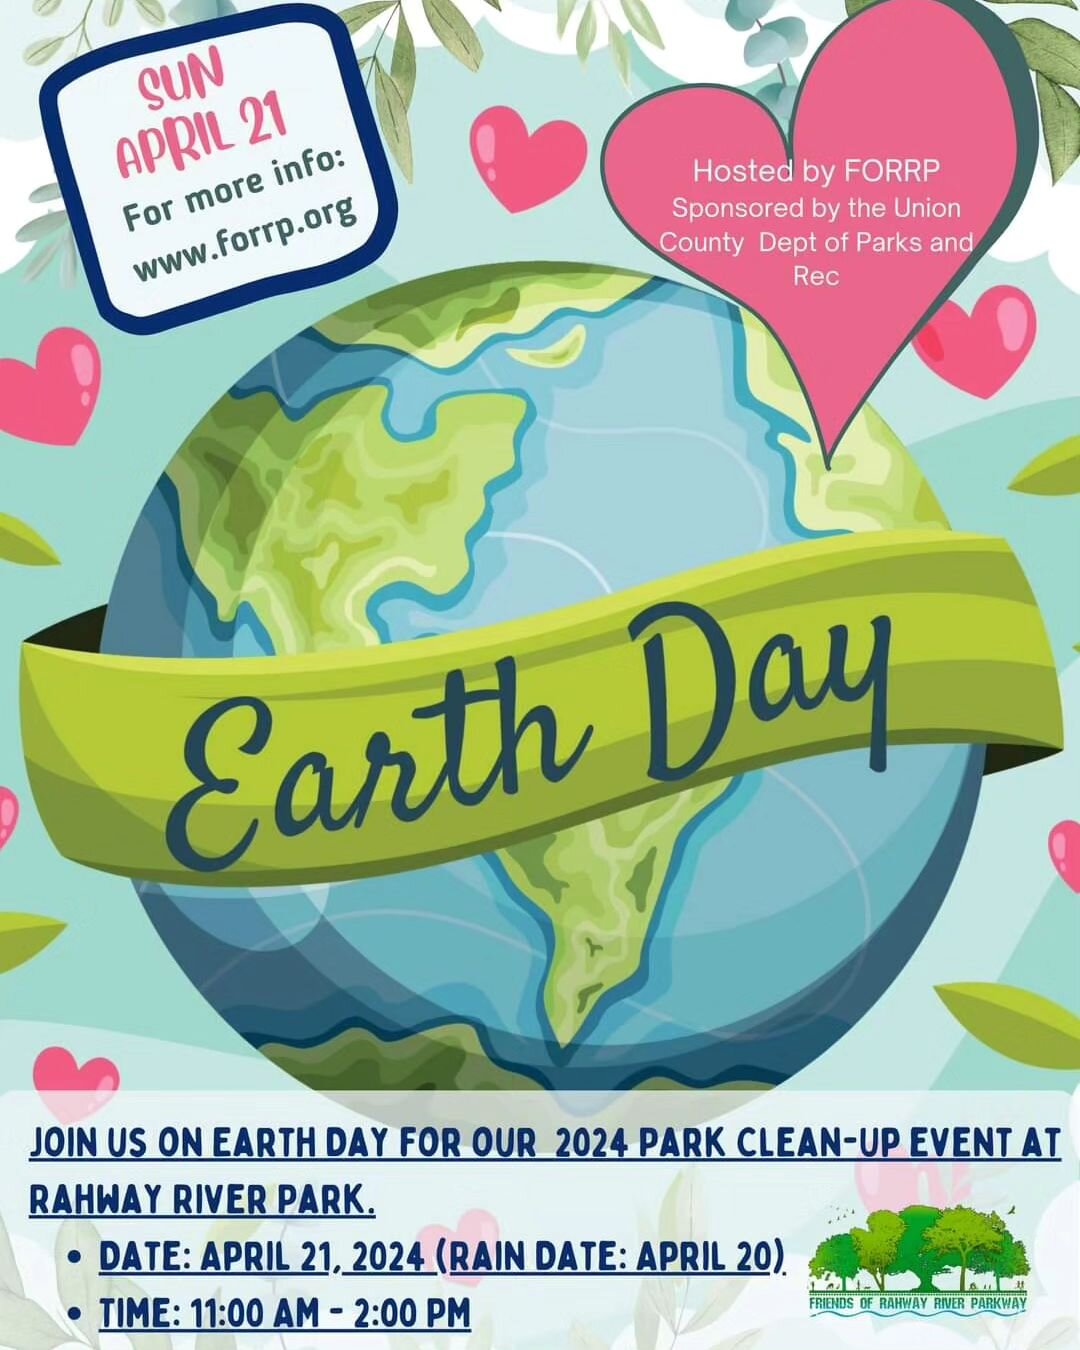 Please help us keep our beautiful park clean and healthy for all to enjoy! 🌳

Let's celebrate Earth Day 2024! We are organizing a community clean-up event. We'll pick up litter and beautify the park in preparation for spring.🌳

This is an excellent